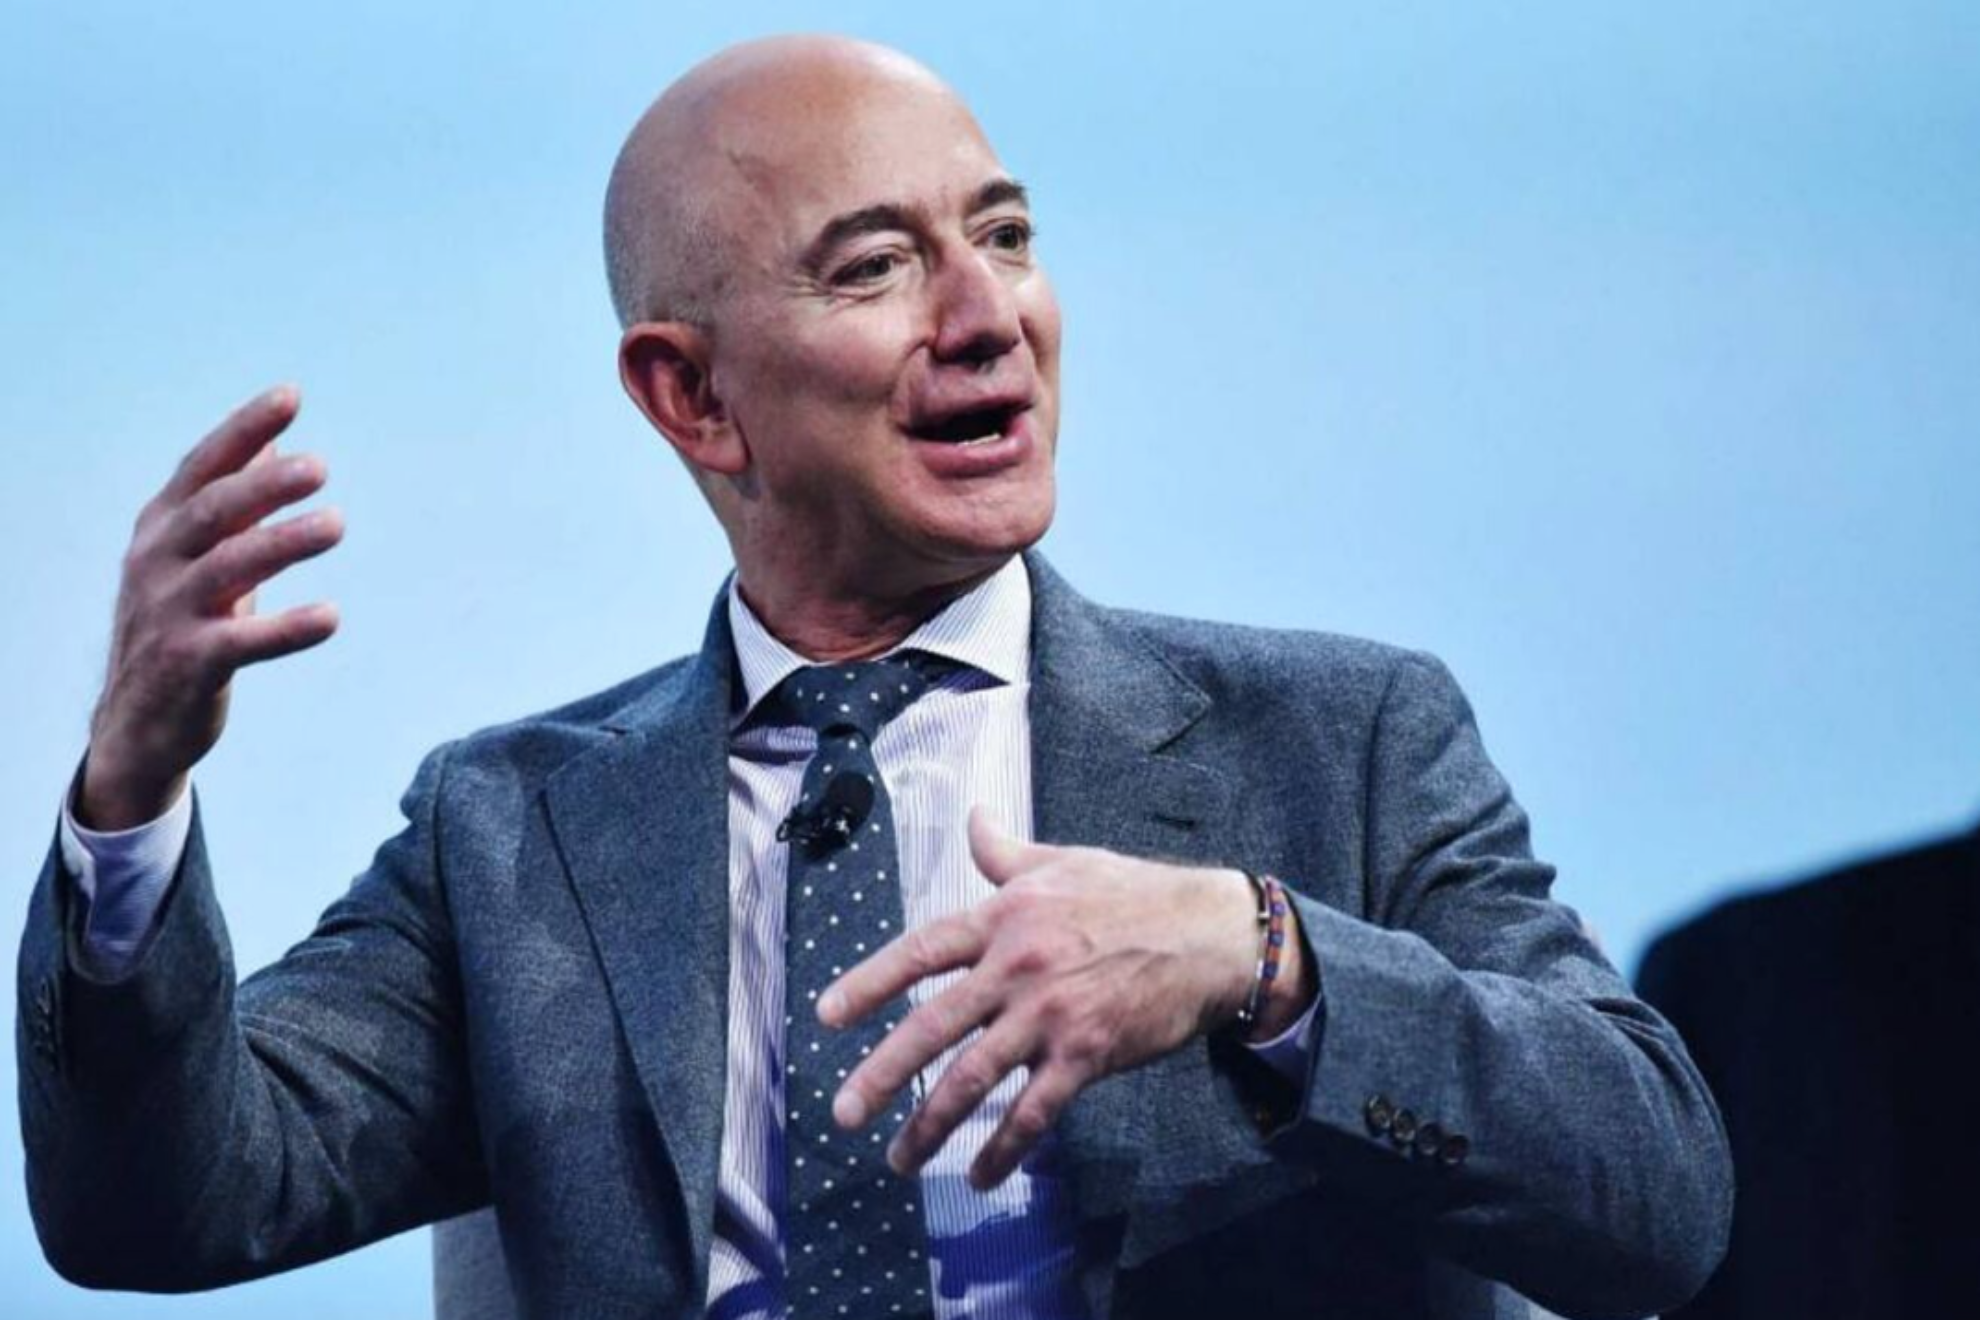 The new team Jeff Bezos wants to buy... and it's not the Commanders